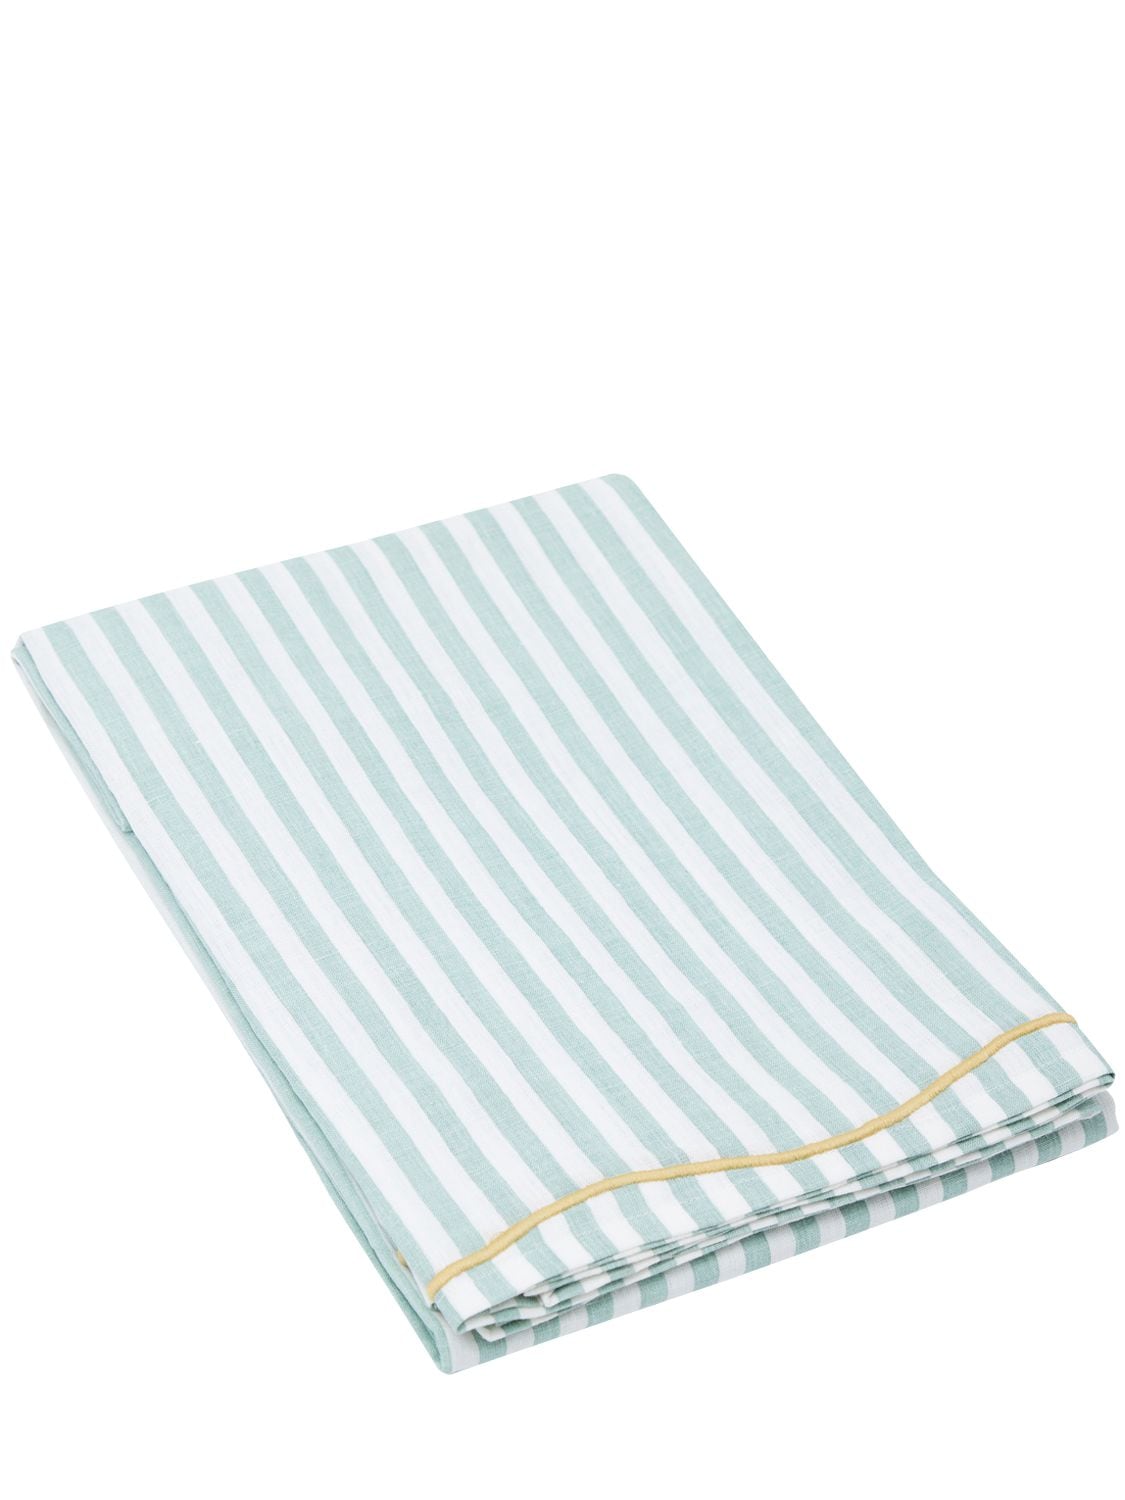 Image of Le Sol Striped Tablecloth